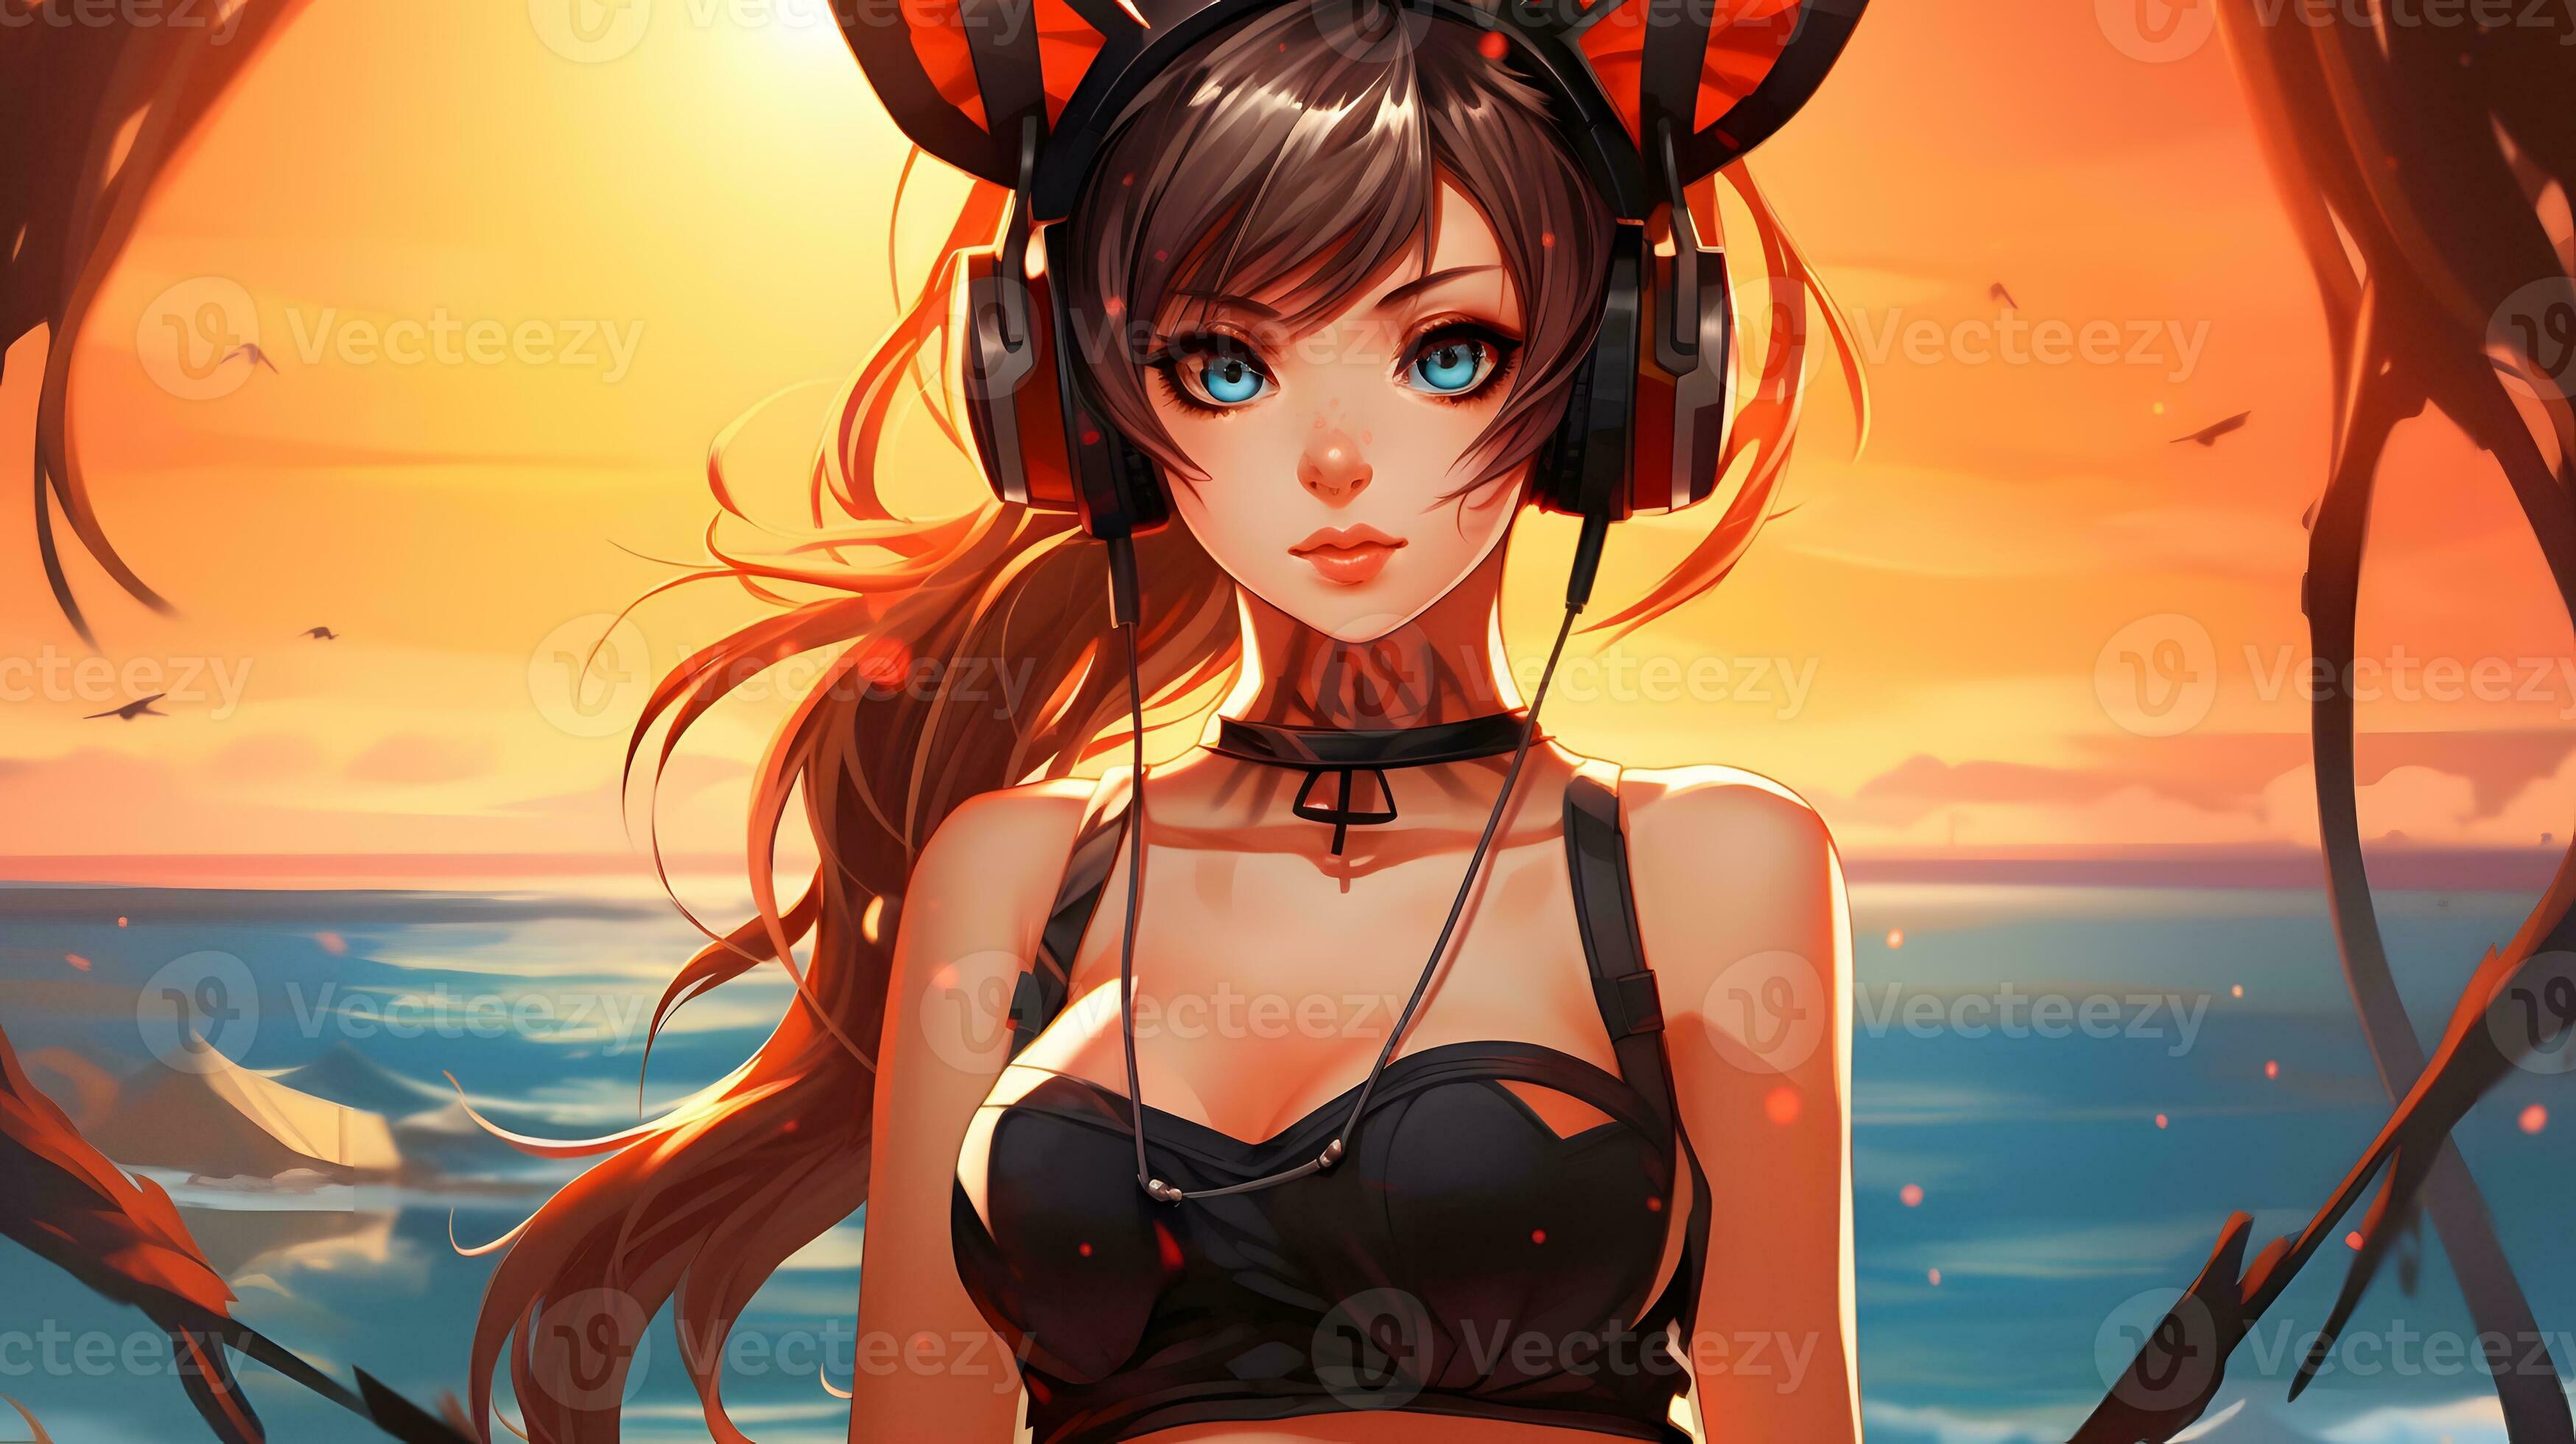 Cute Anime girl character wallpaper. 25938281 Stock Photo at Vecteezy